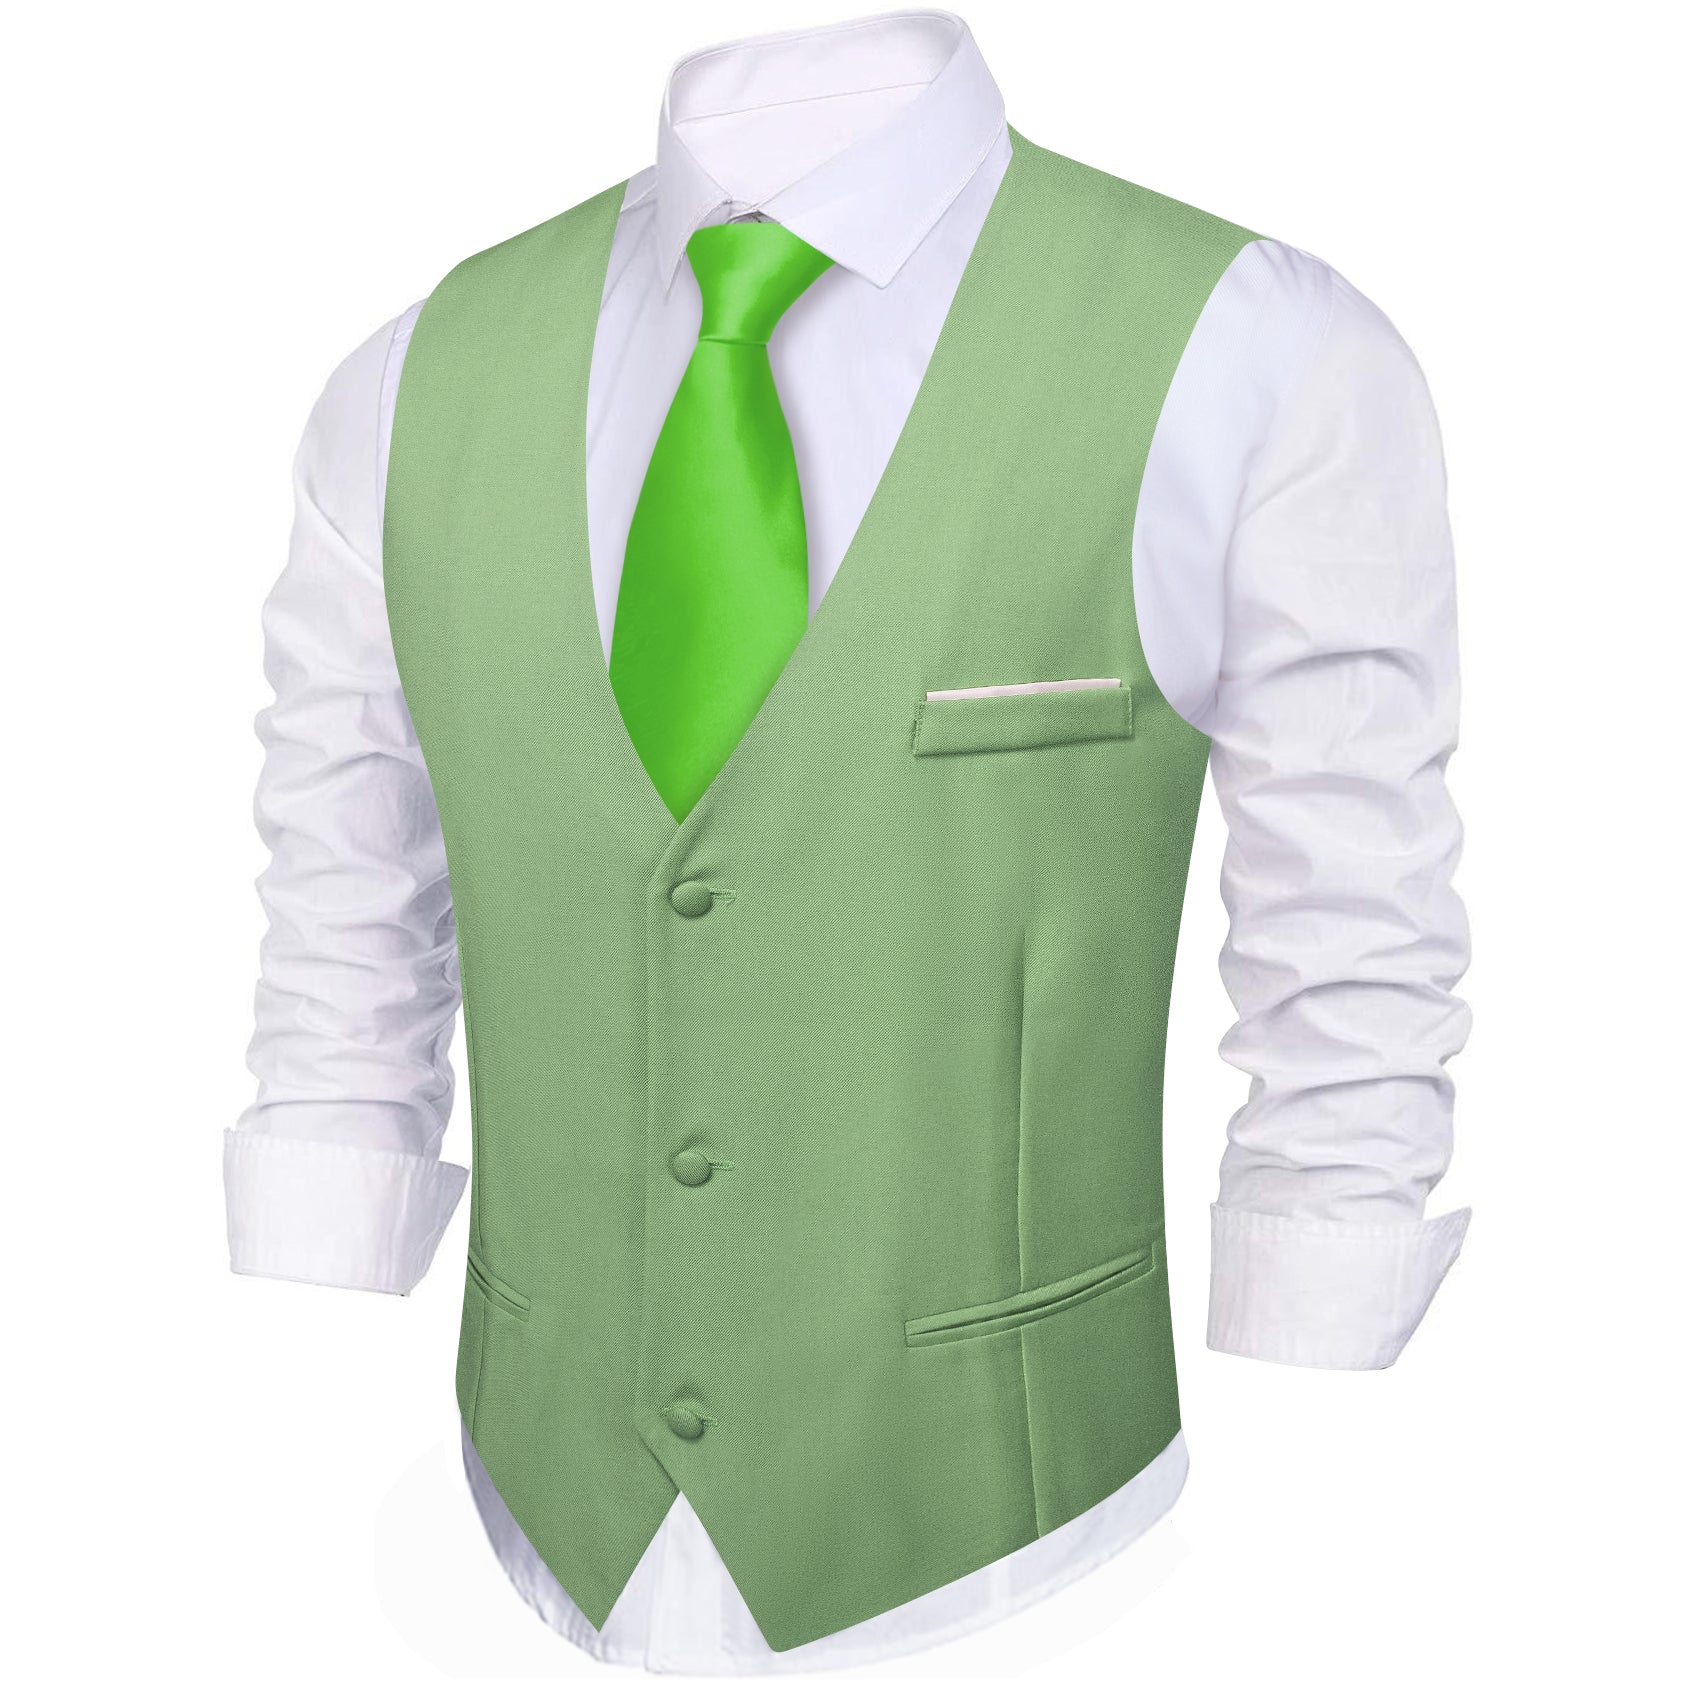 Barry.wang Turquoise Green Solid Business Vest Suit